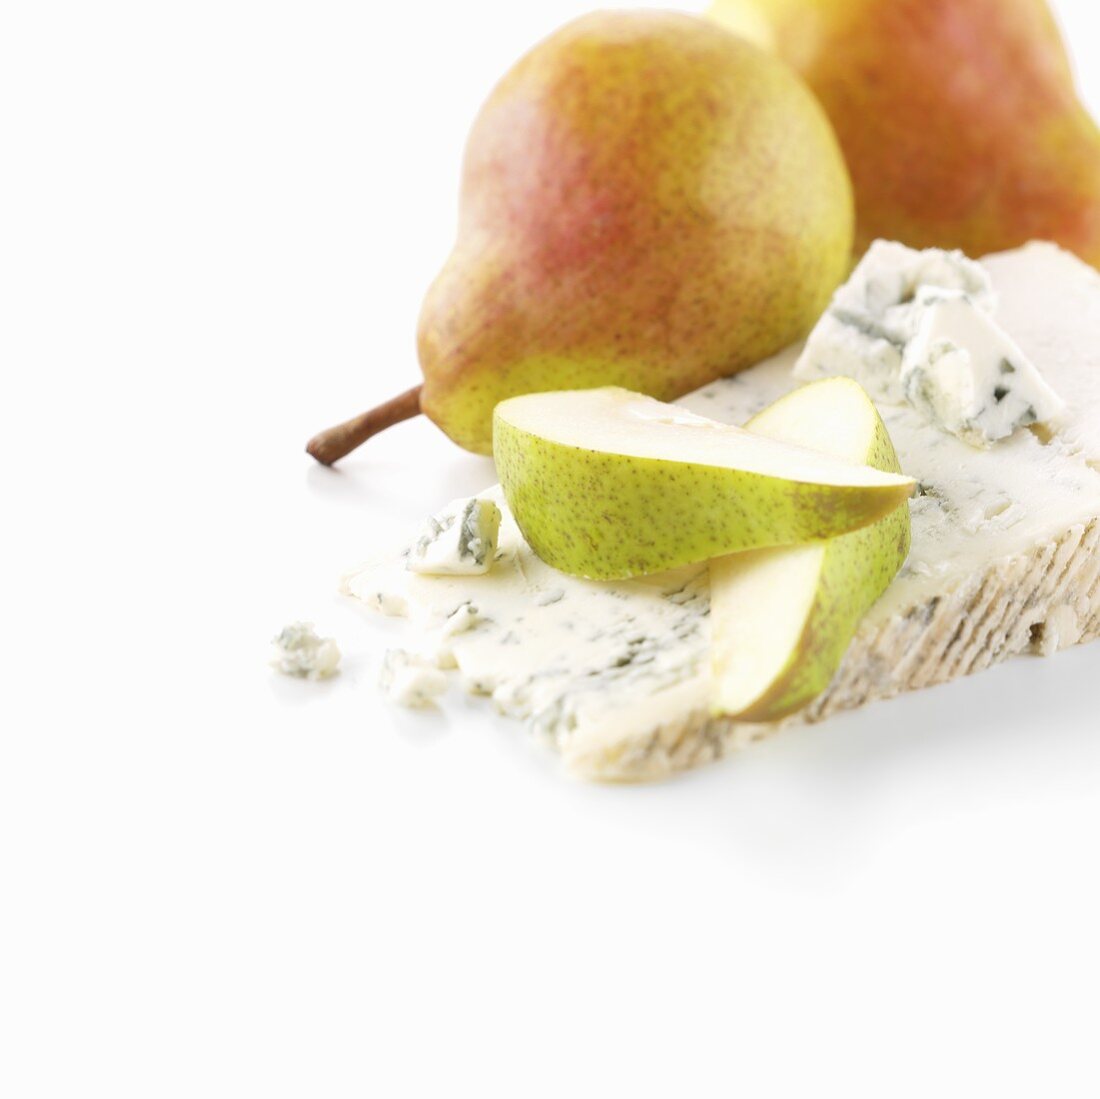 Gorgonzola (dolcelatte) with pears